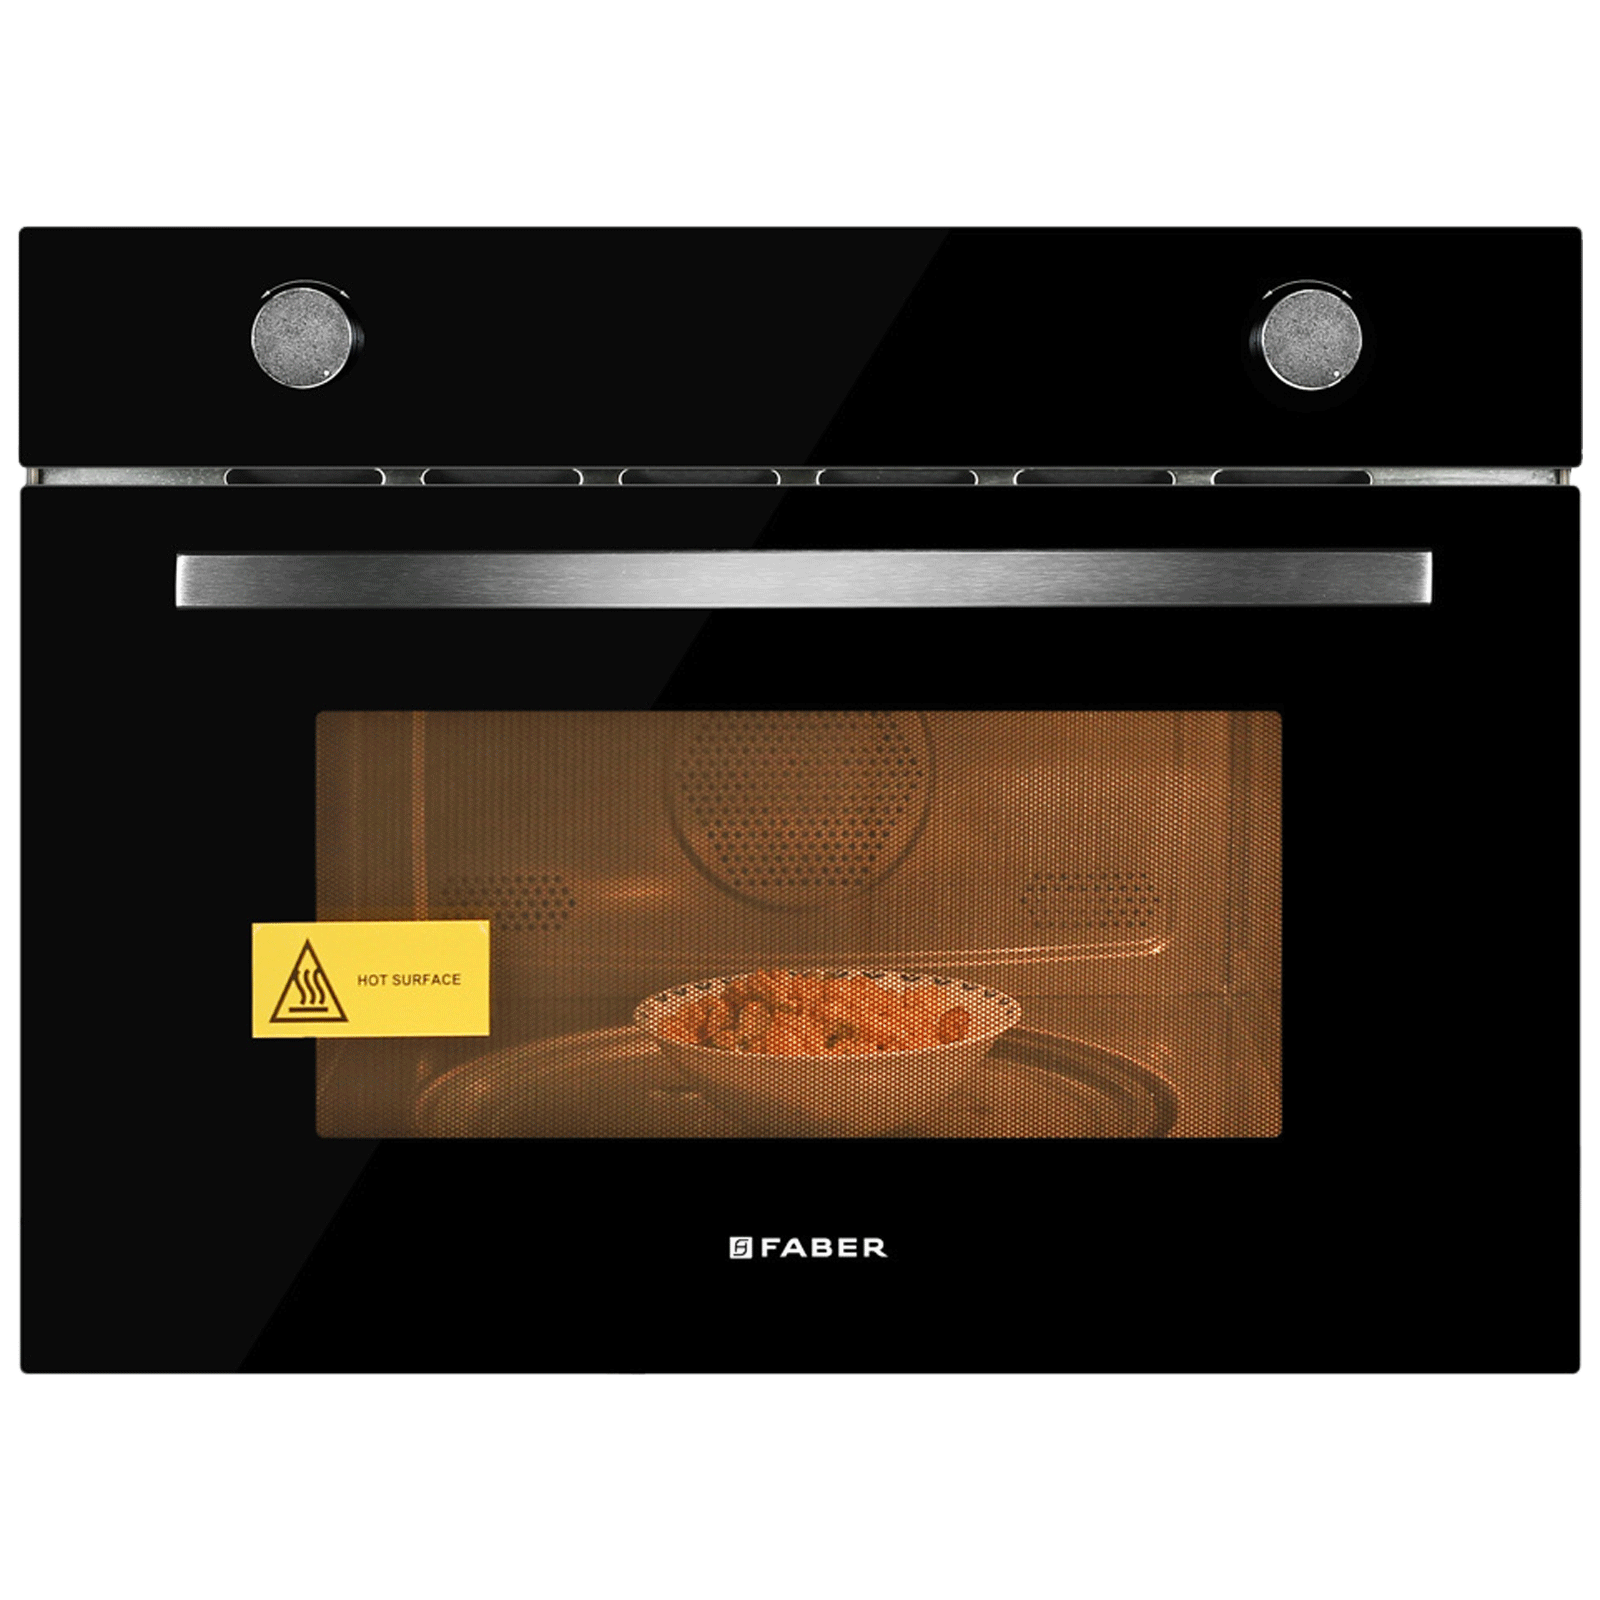 Faber 38 Litres Built-in Microwave Oven (Microwave + Grill + Convection, FBIMWO, Black)_1